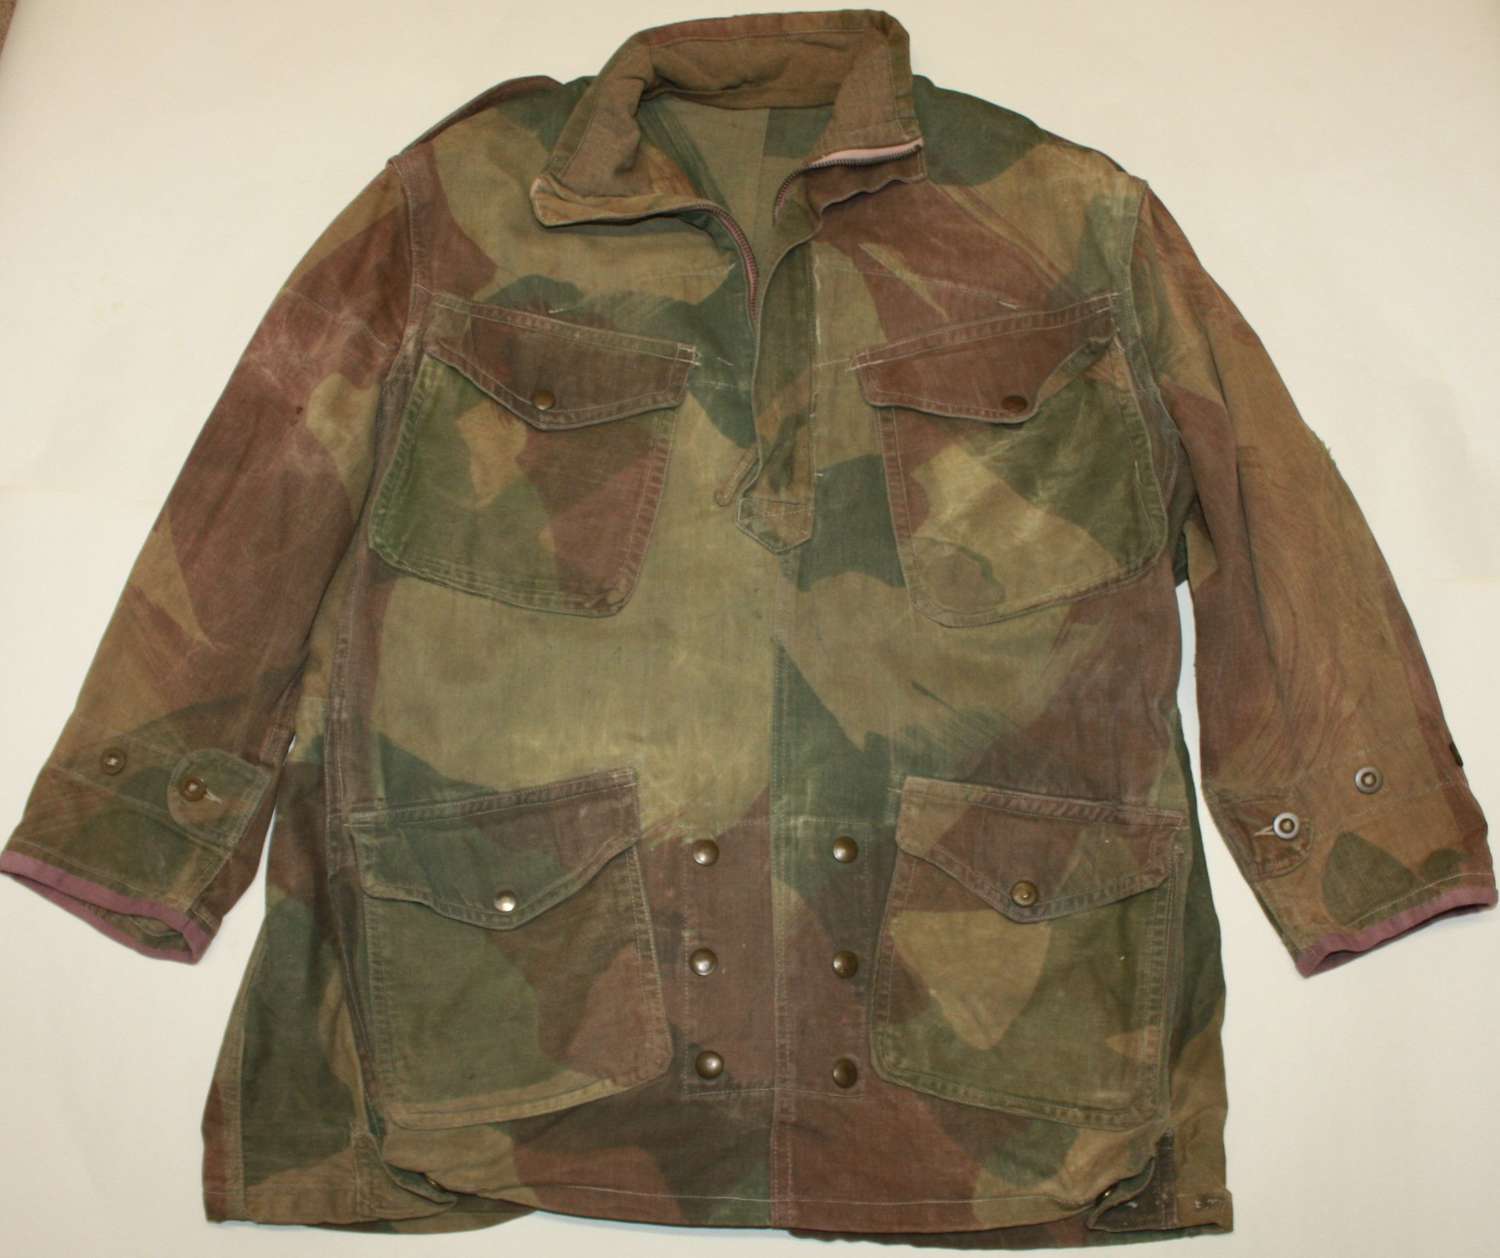 A RESONABLE EXAMPLE OF A EARLY POST WAR 2ND PATTERN DENISON SMOCK 1948